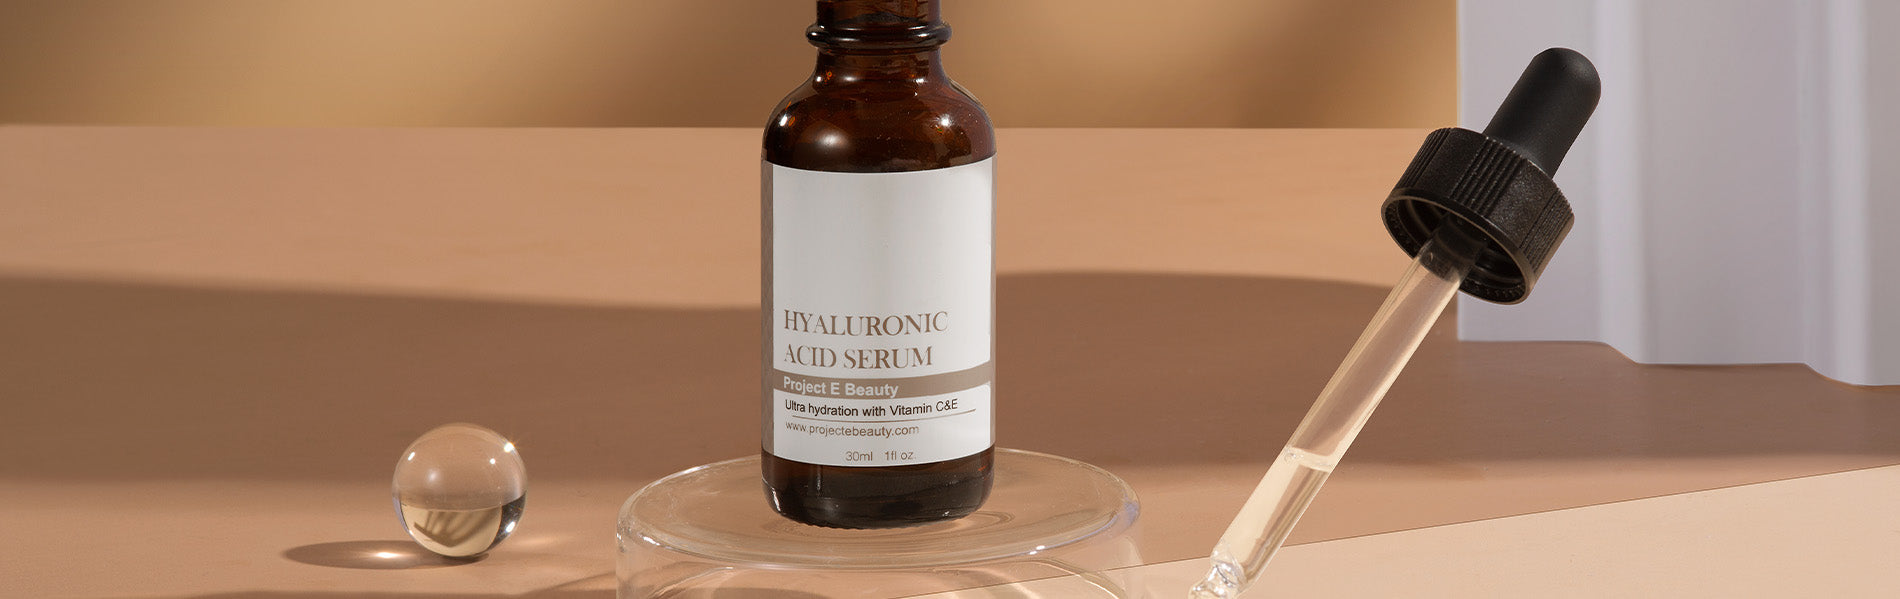 Hyaluronic Acid: What It Is, Benefits & How To Use